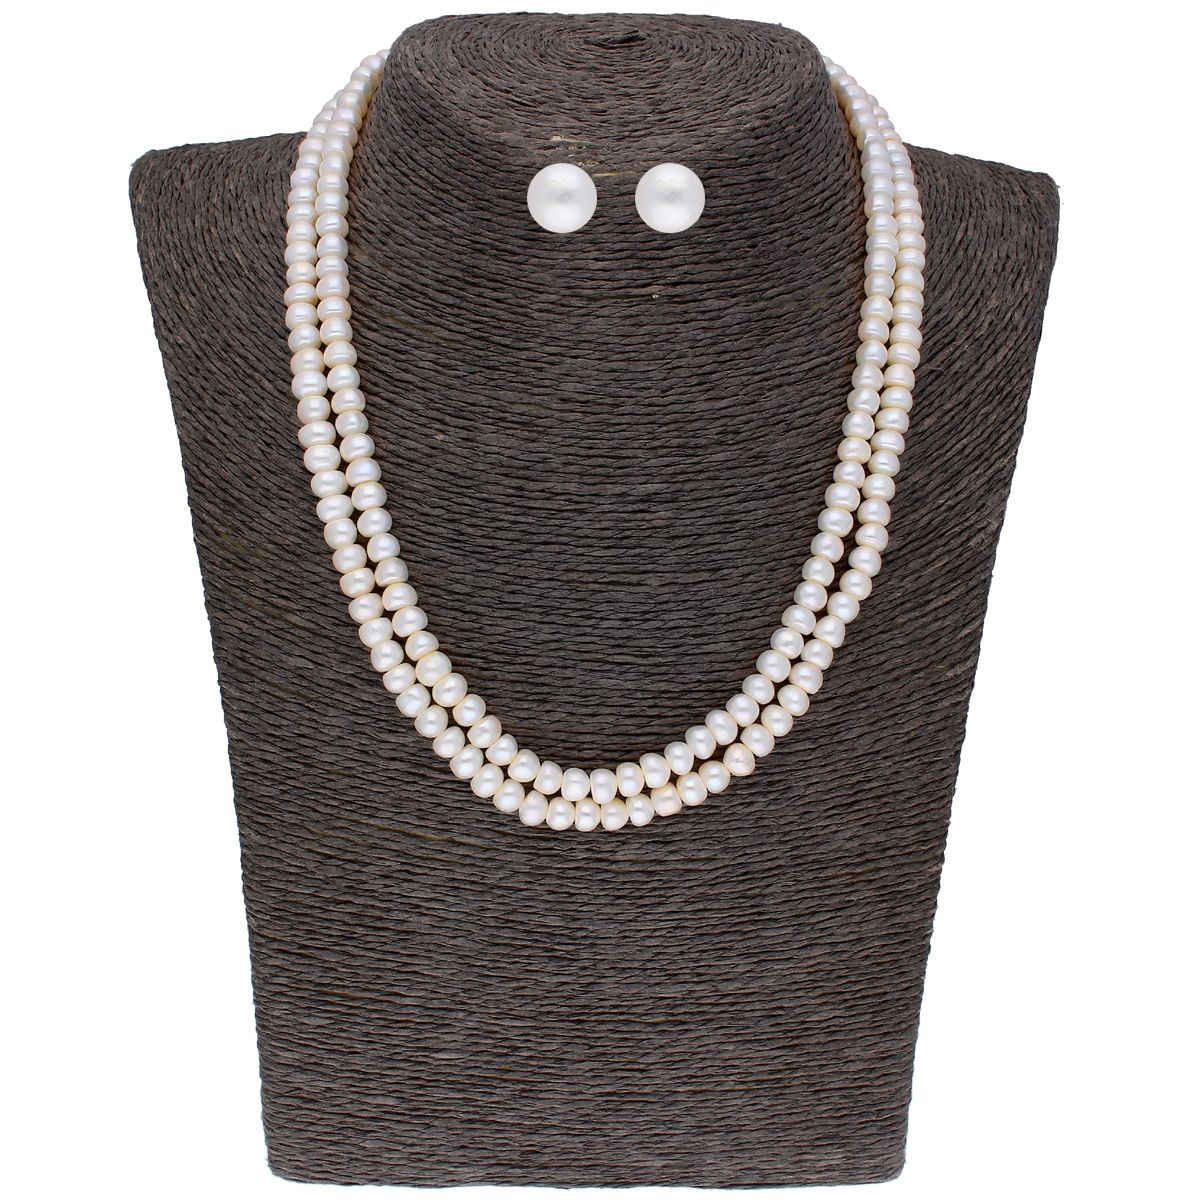 2 Strand Faux Pearl Necklace with Rhinestone Set Clasp - Ruby Lane